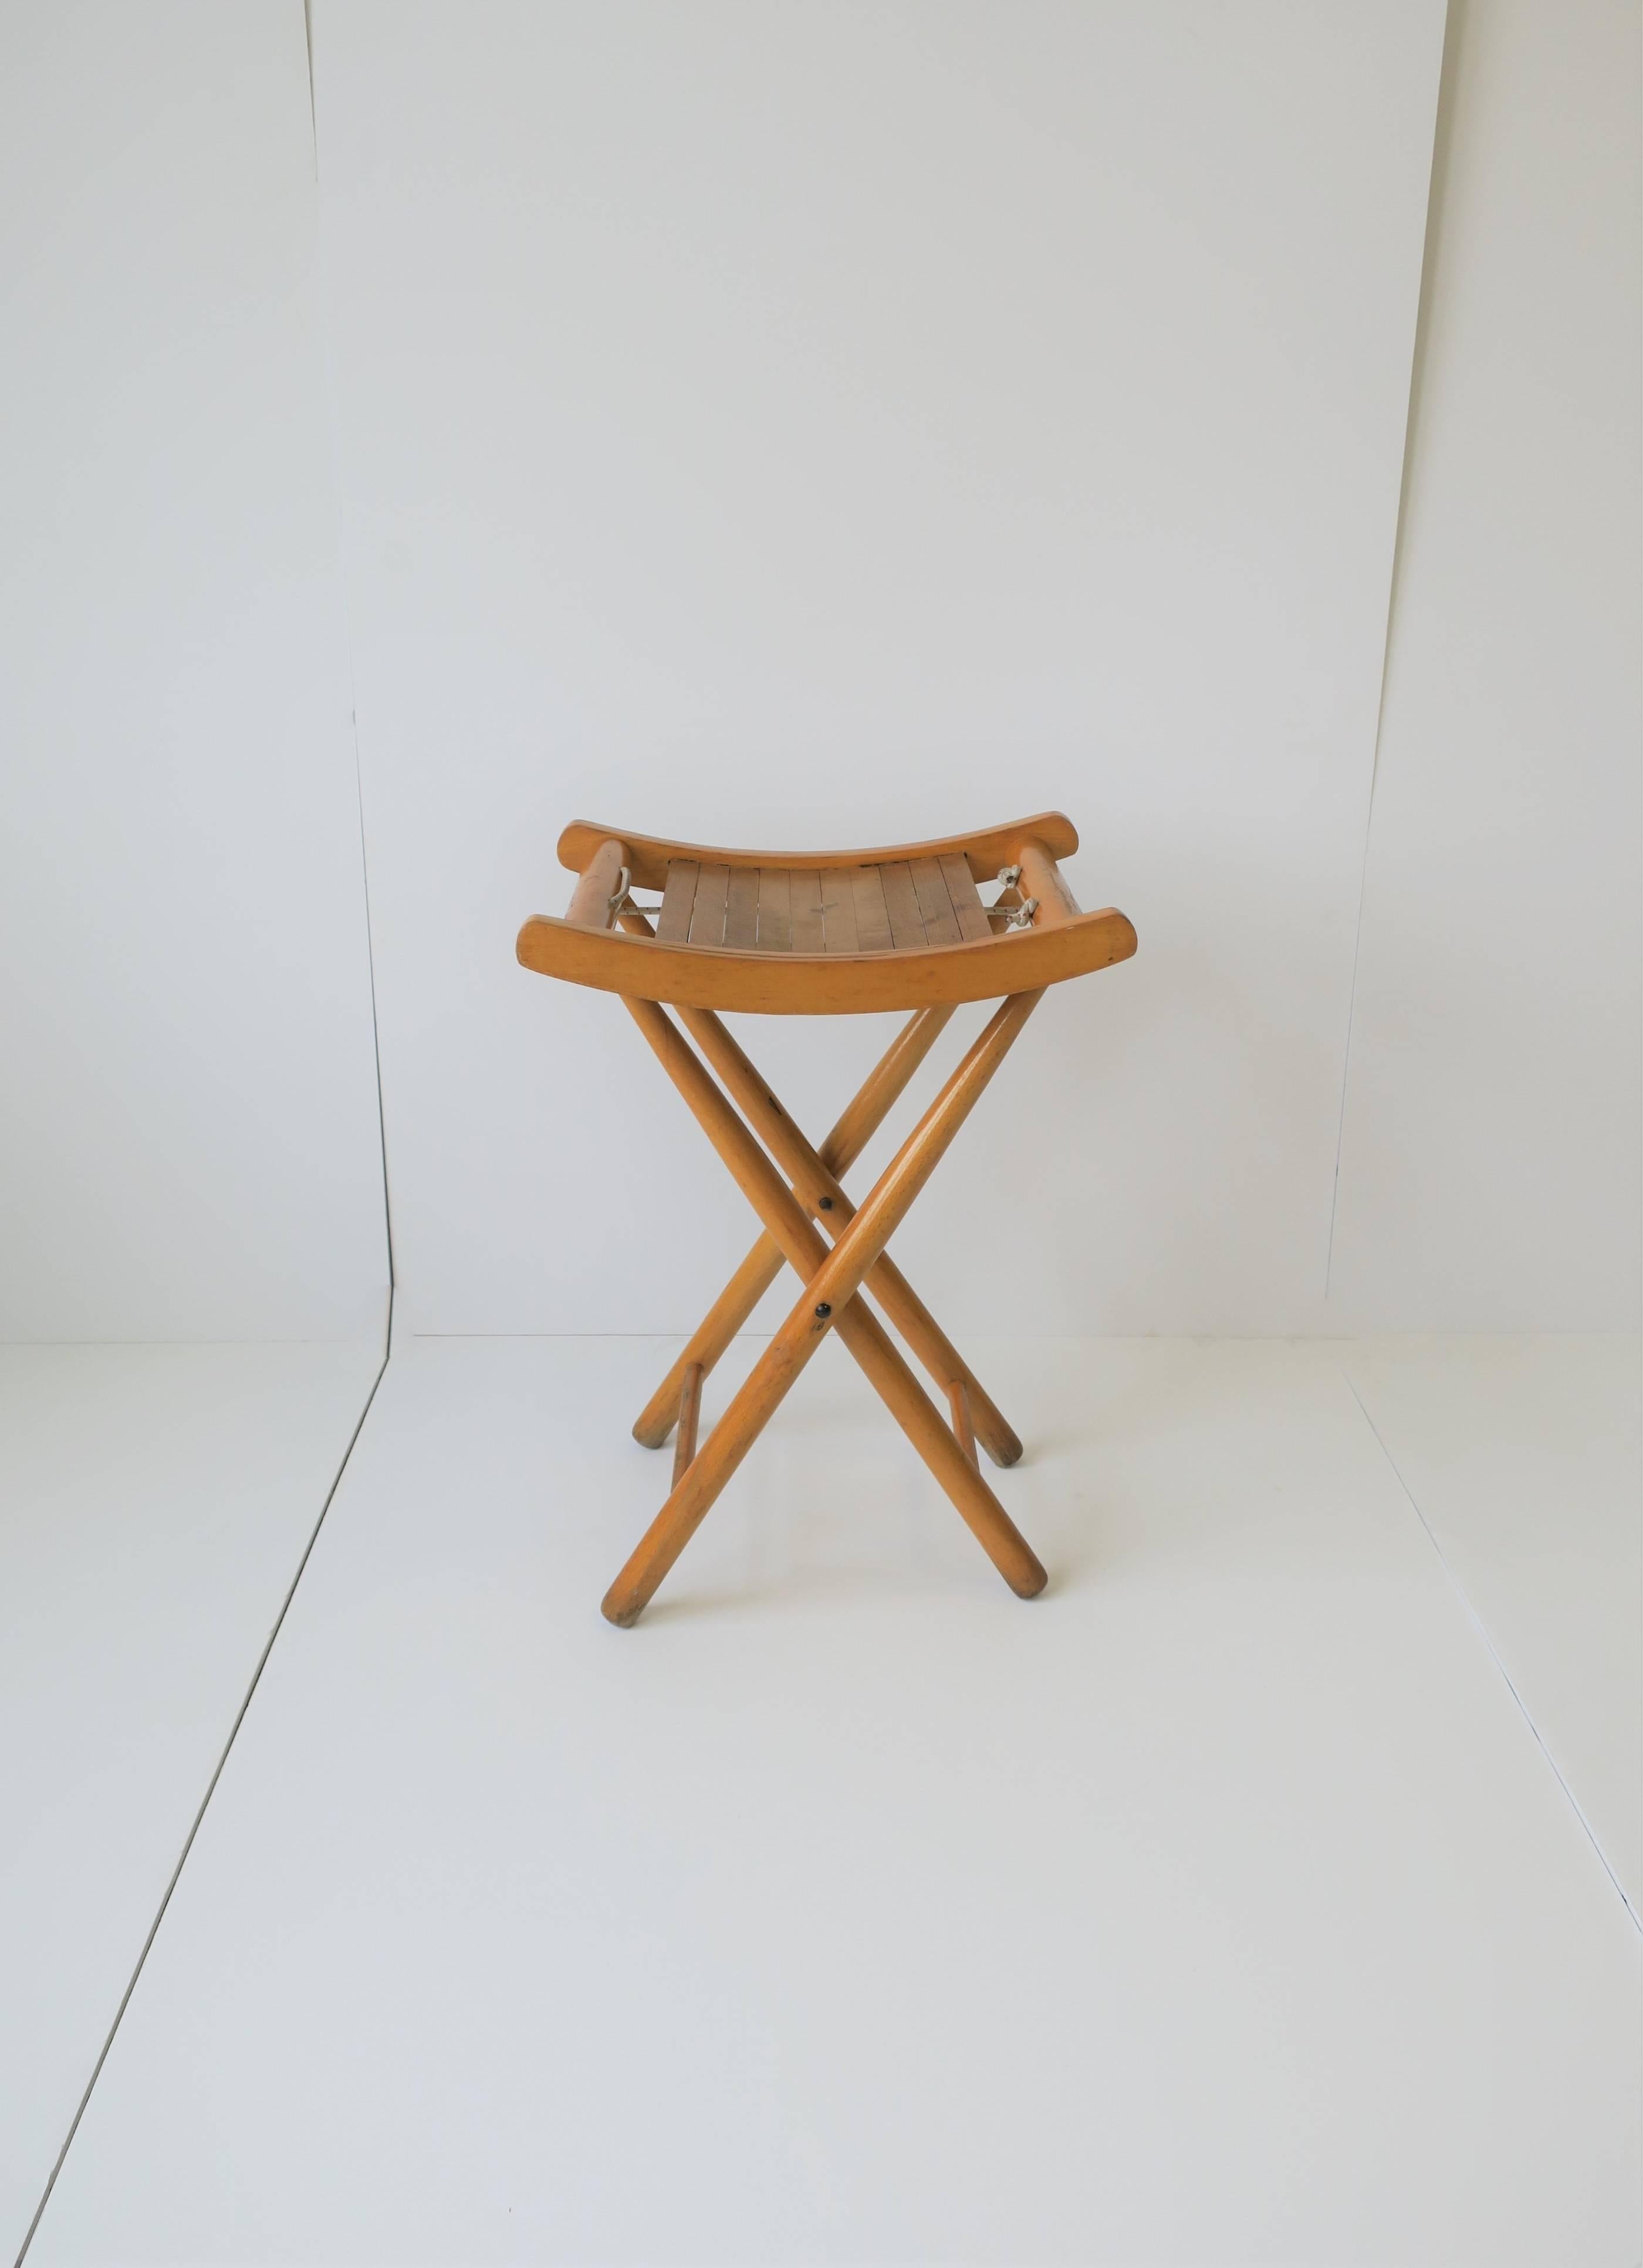 A small vintage blonde wood folding stool or bench with nautical rope detail. Piece can also be used as a side table providing there is a book on top as a stable environment for a glass, etc., (see images #6 and #8 showing book with sea shell.)